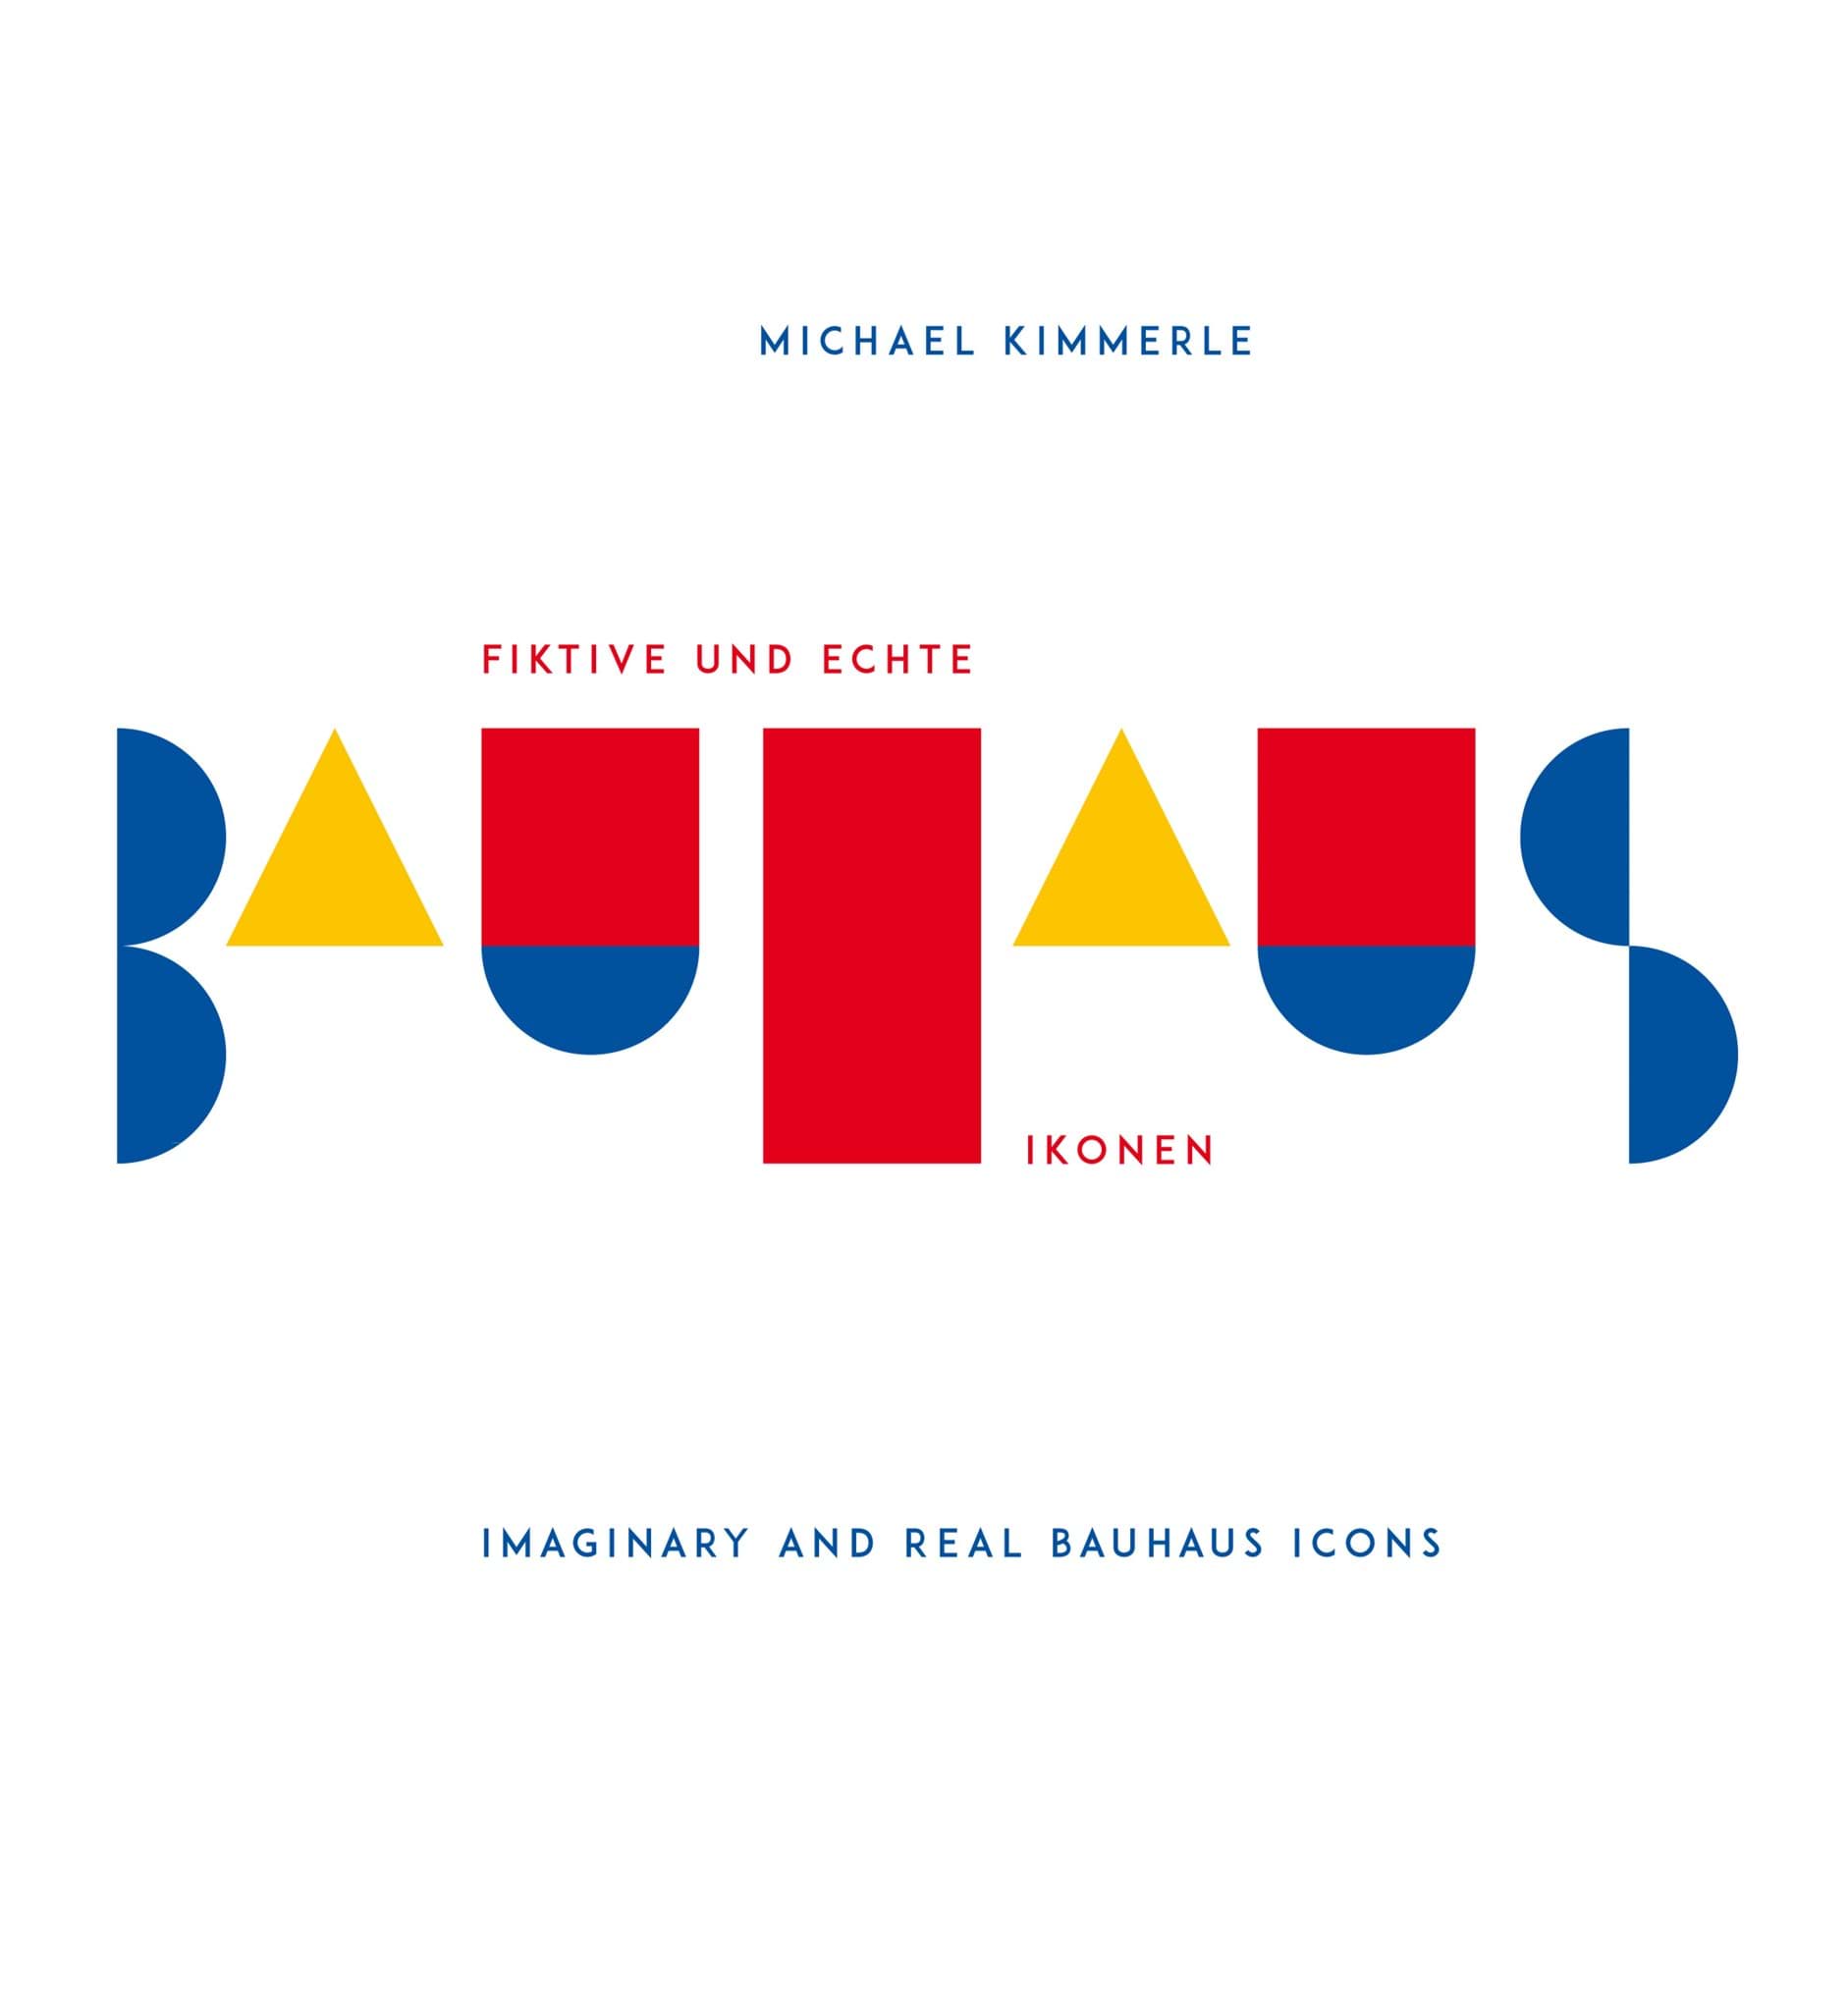 Imaginary and Real Bauhaus Icons Book 2的图片
